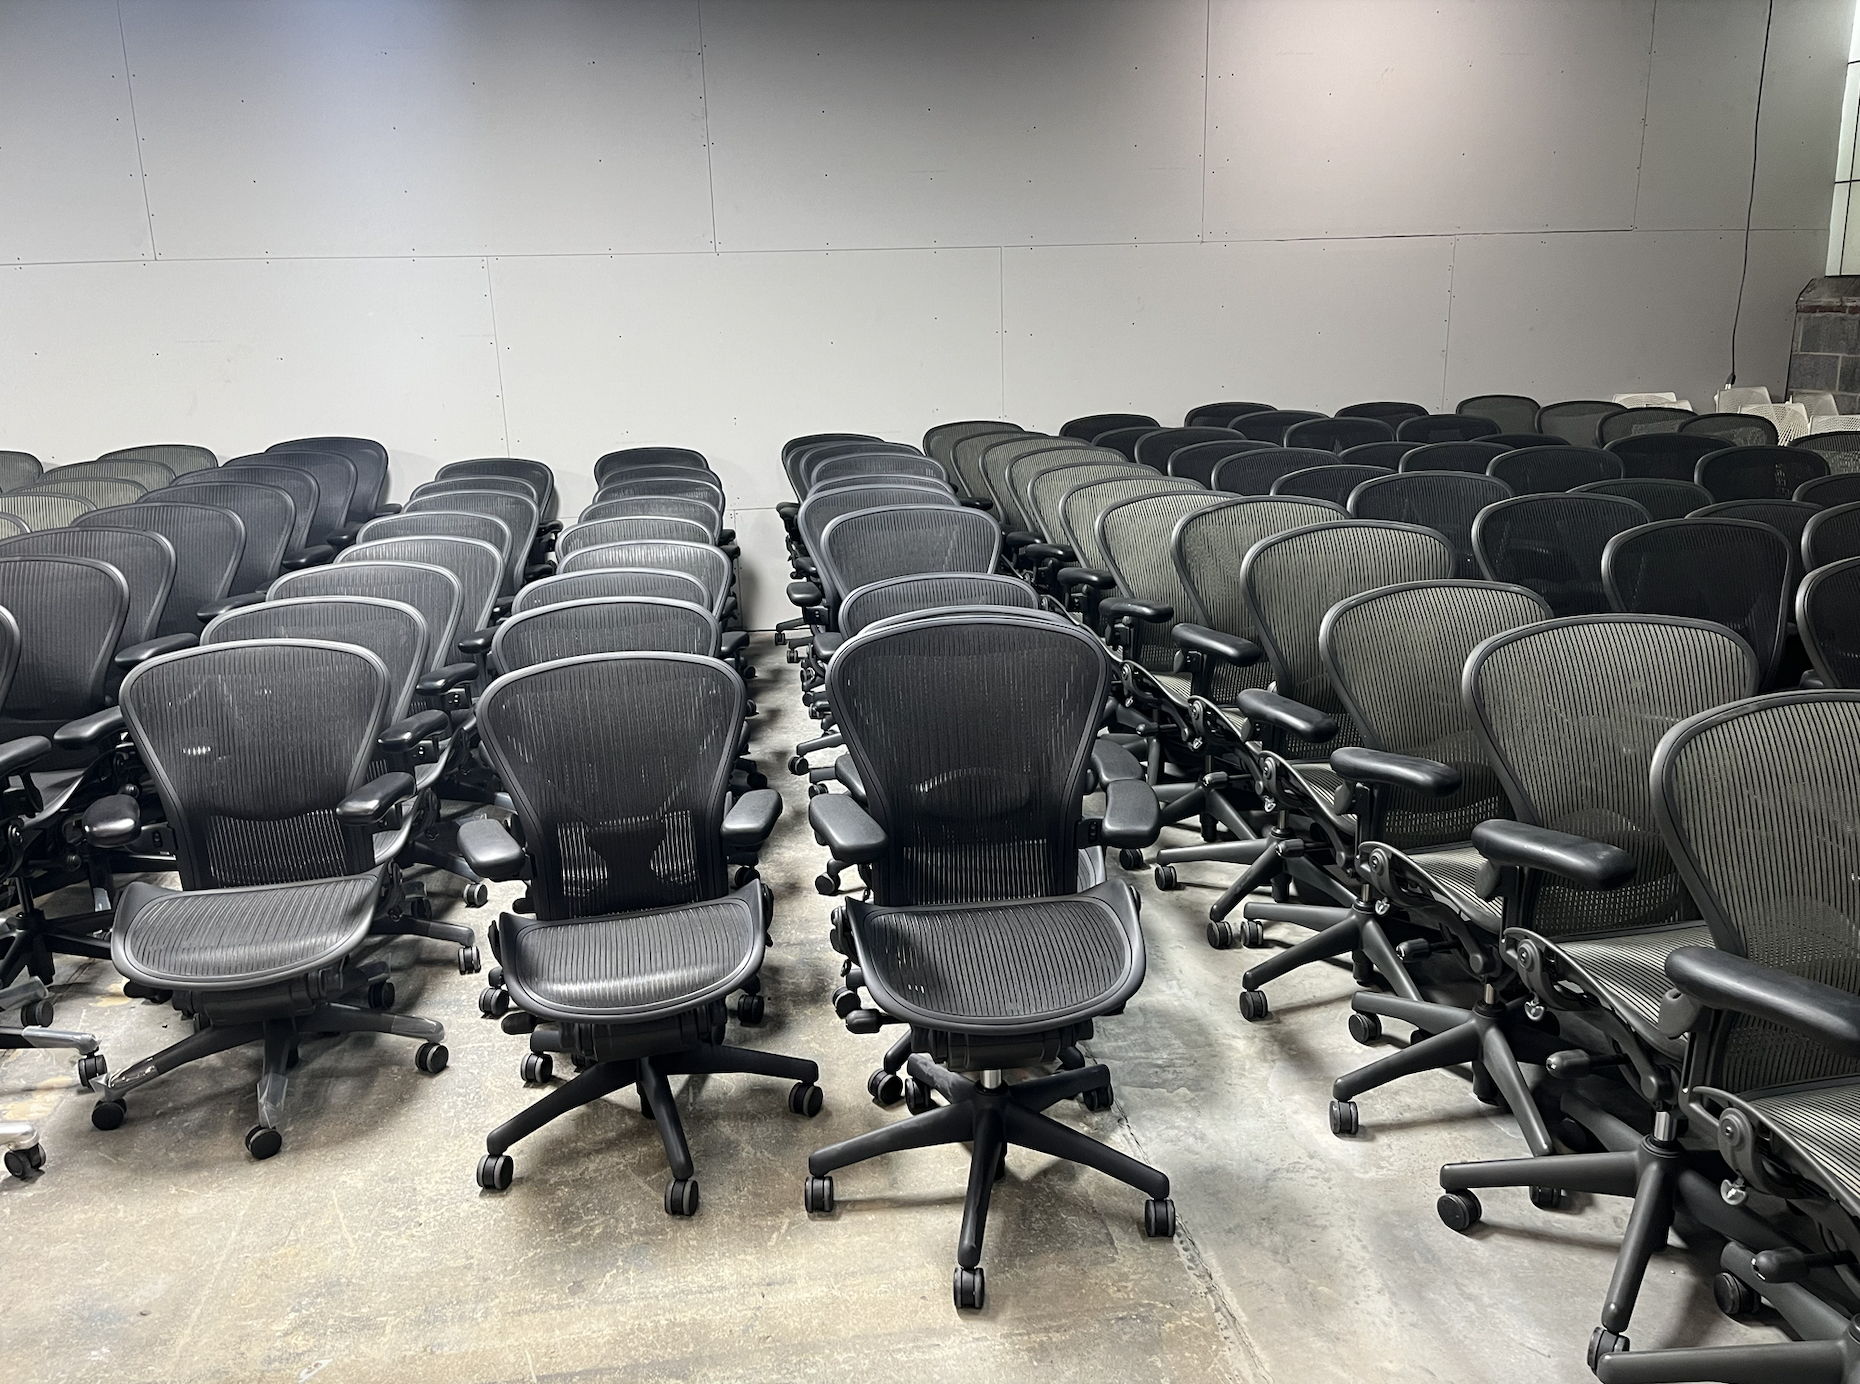 The Death of Office Culture Leads to Boom Times for Used-Chair Salesman